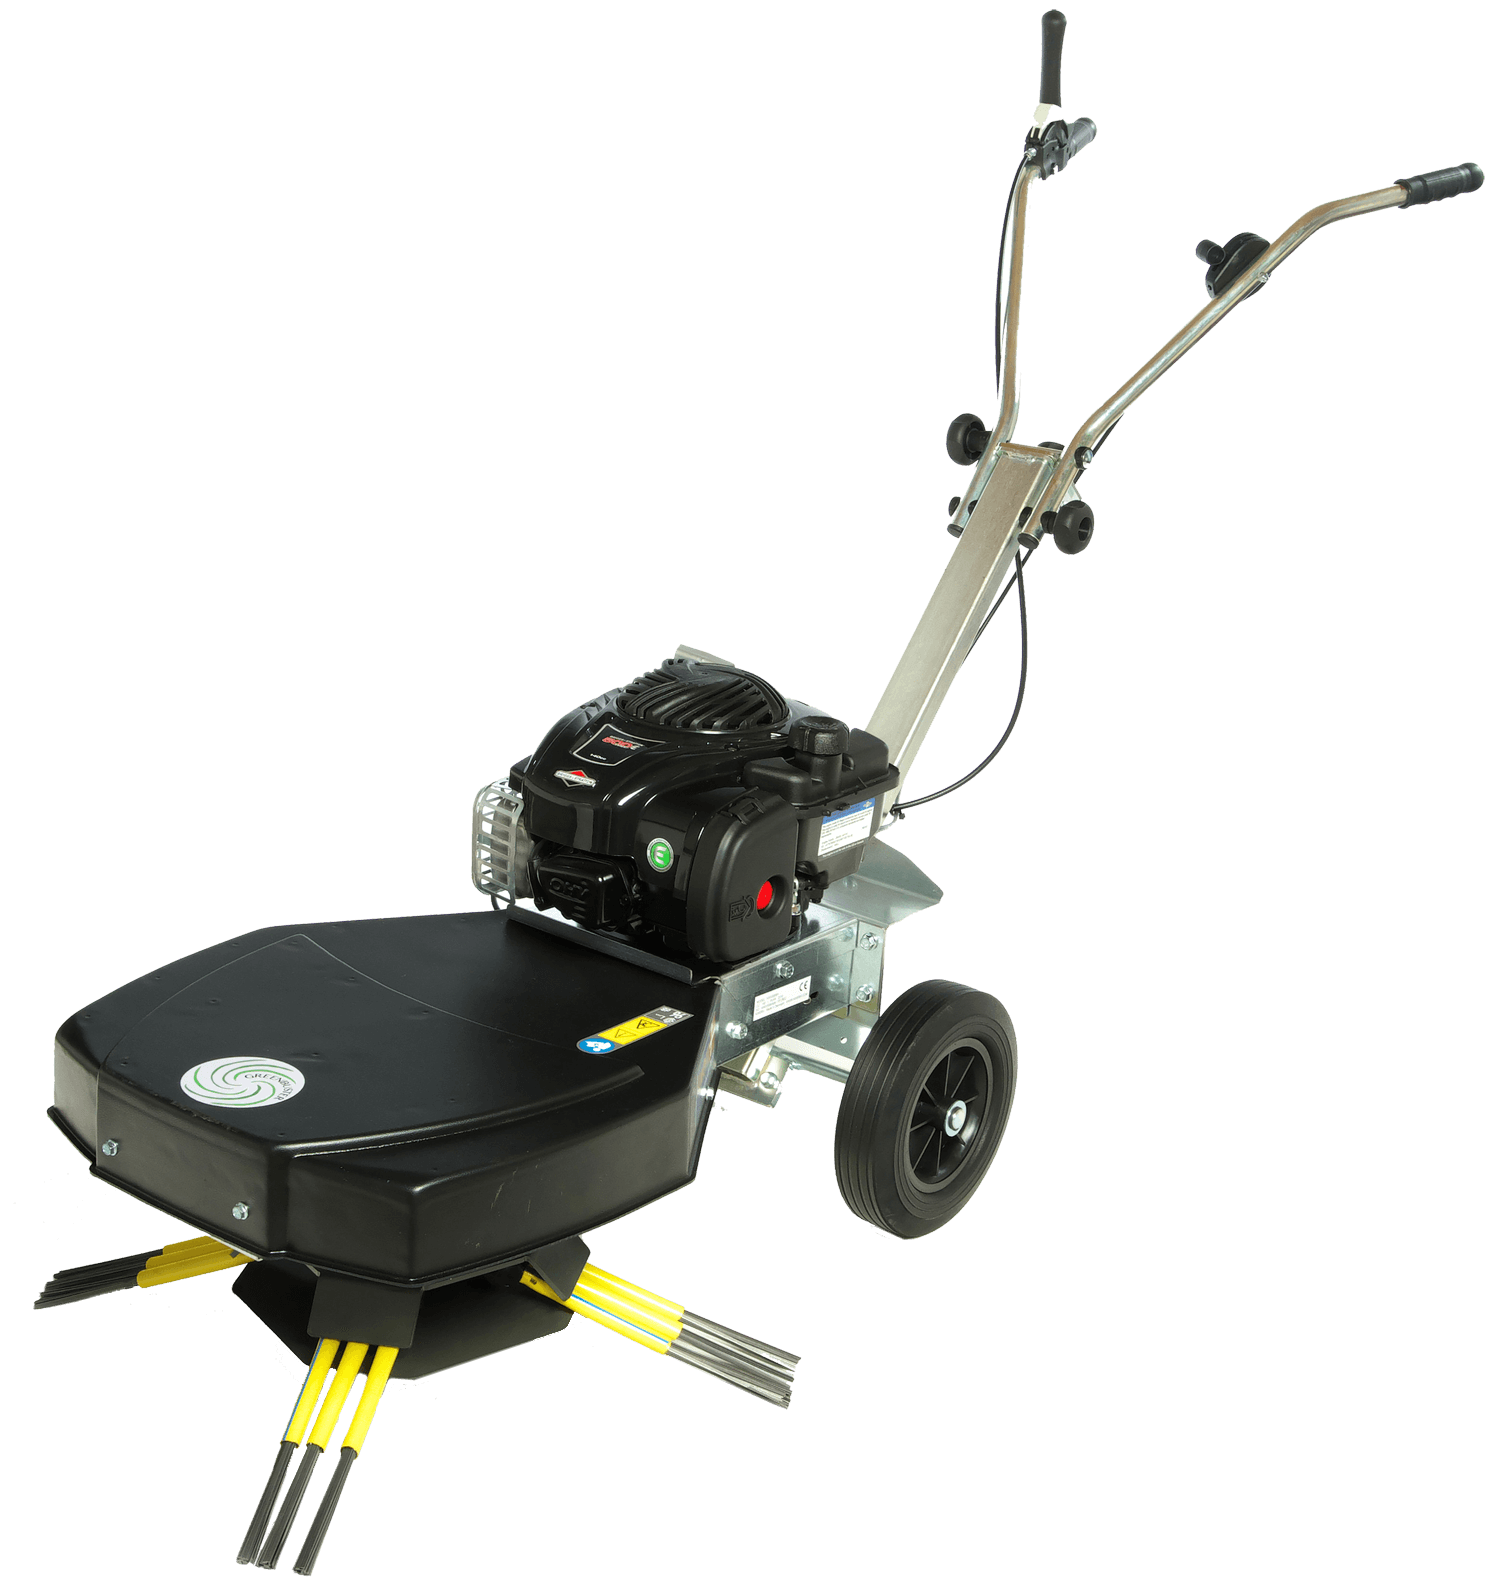 Greenbuster Pro66